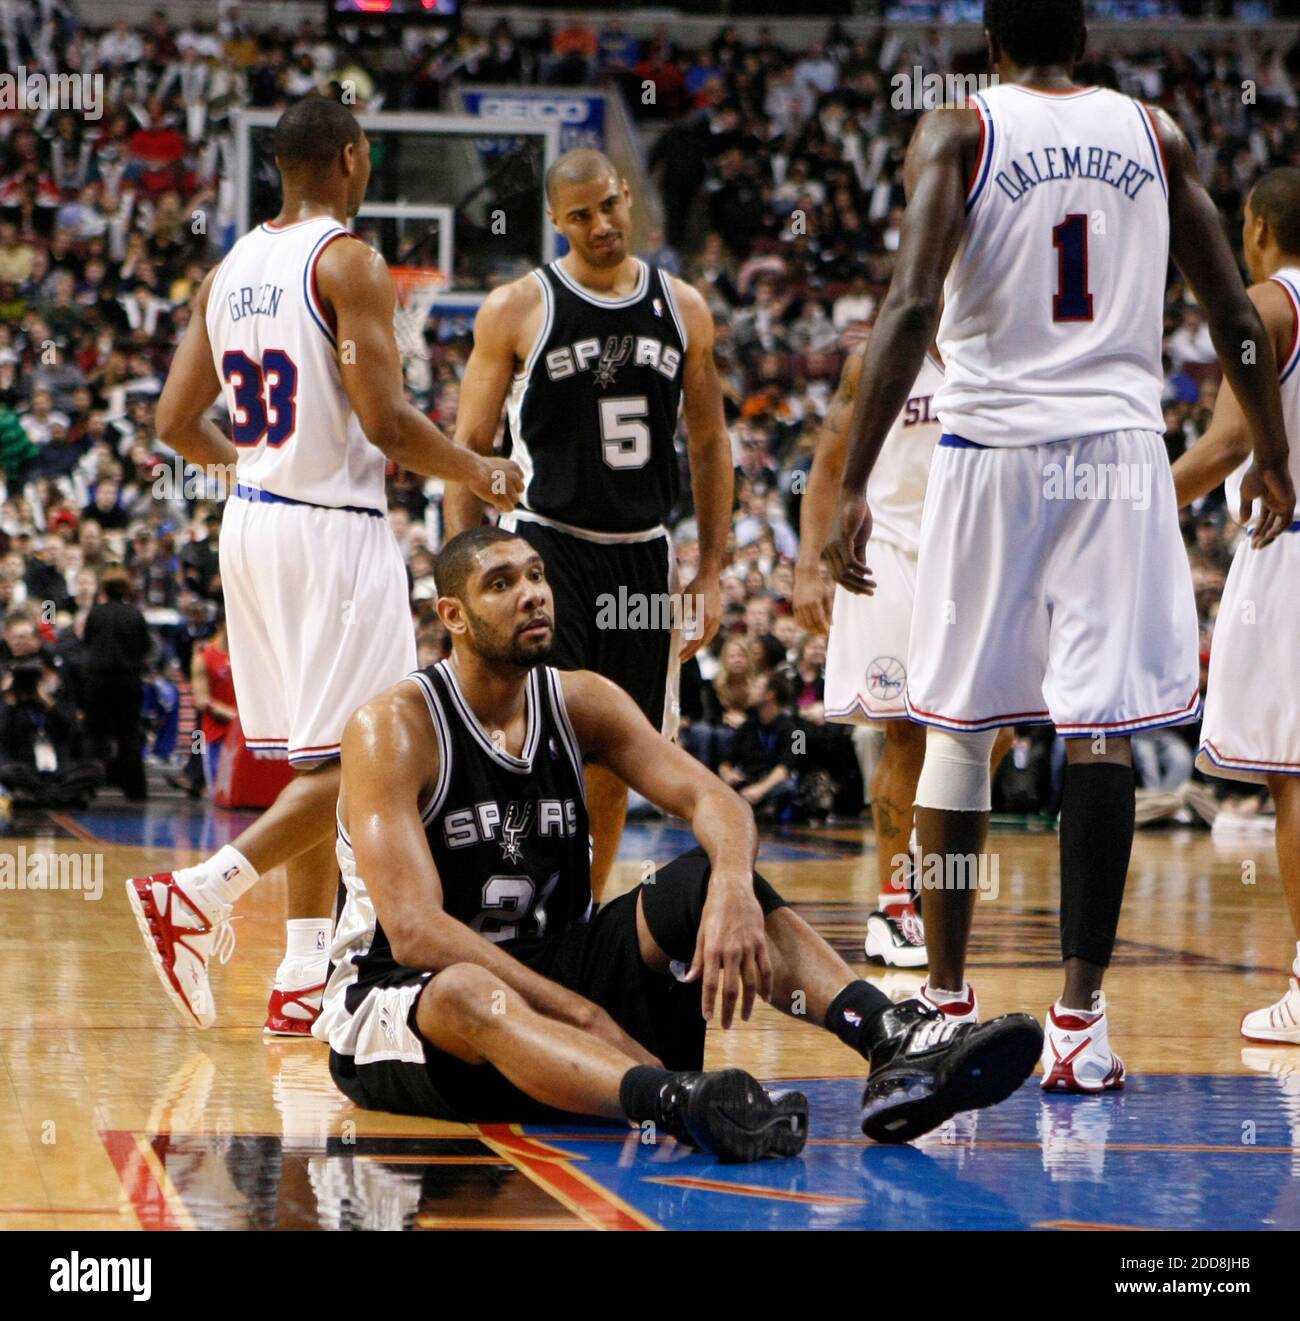 NO FILM, NO VIDEO, NO TV, NO DOCUMENTARY - SPAn Antonio Spurs Tim Duncan looks despairingly after a foul was called on teammate Ime Udoka in background in the second half at the Wachovia Center in Philadelphia, PA, USA on January 16, 2009. Photo by Ron Cortes/Philadelphia Inquirer/MCT/MCT/Cameleon/ABACAPRESS.COM Stock Photo